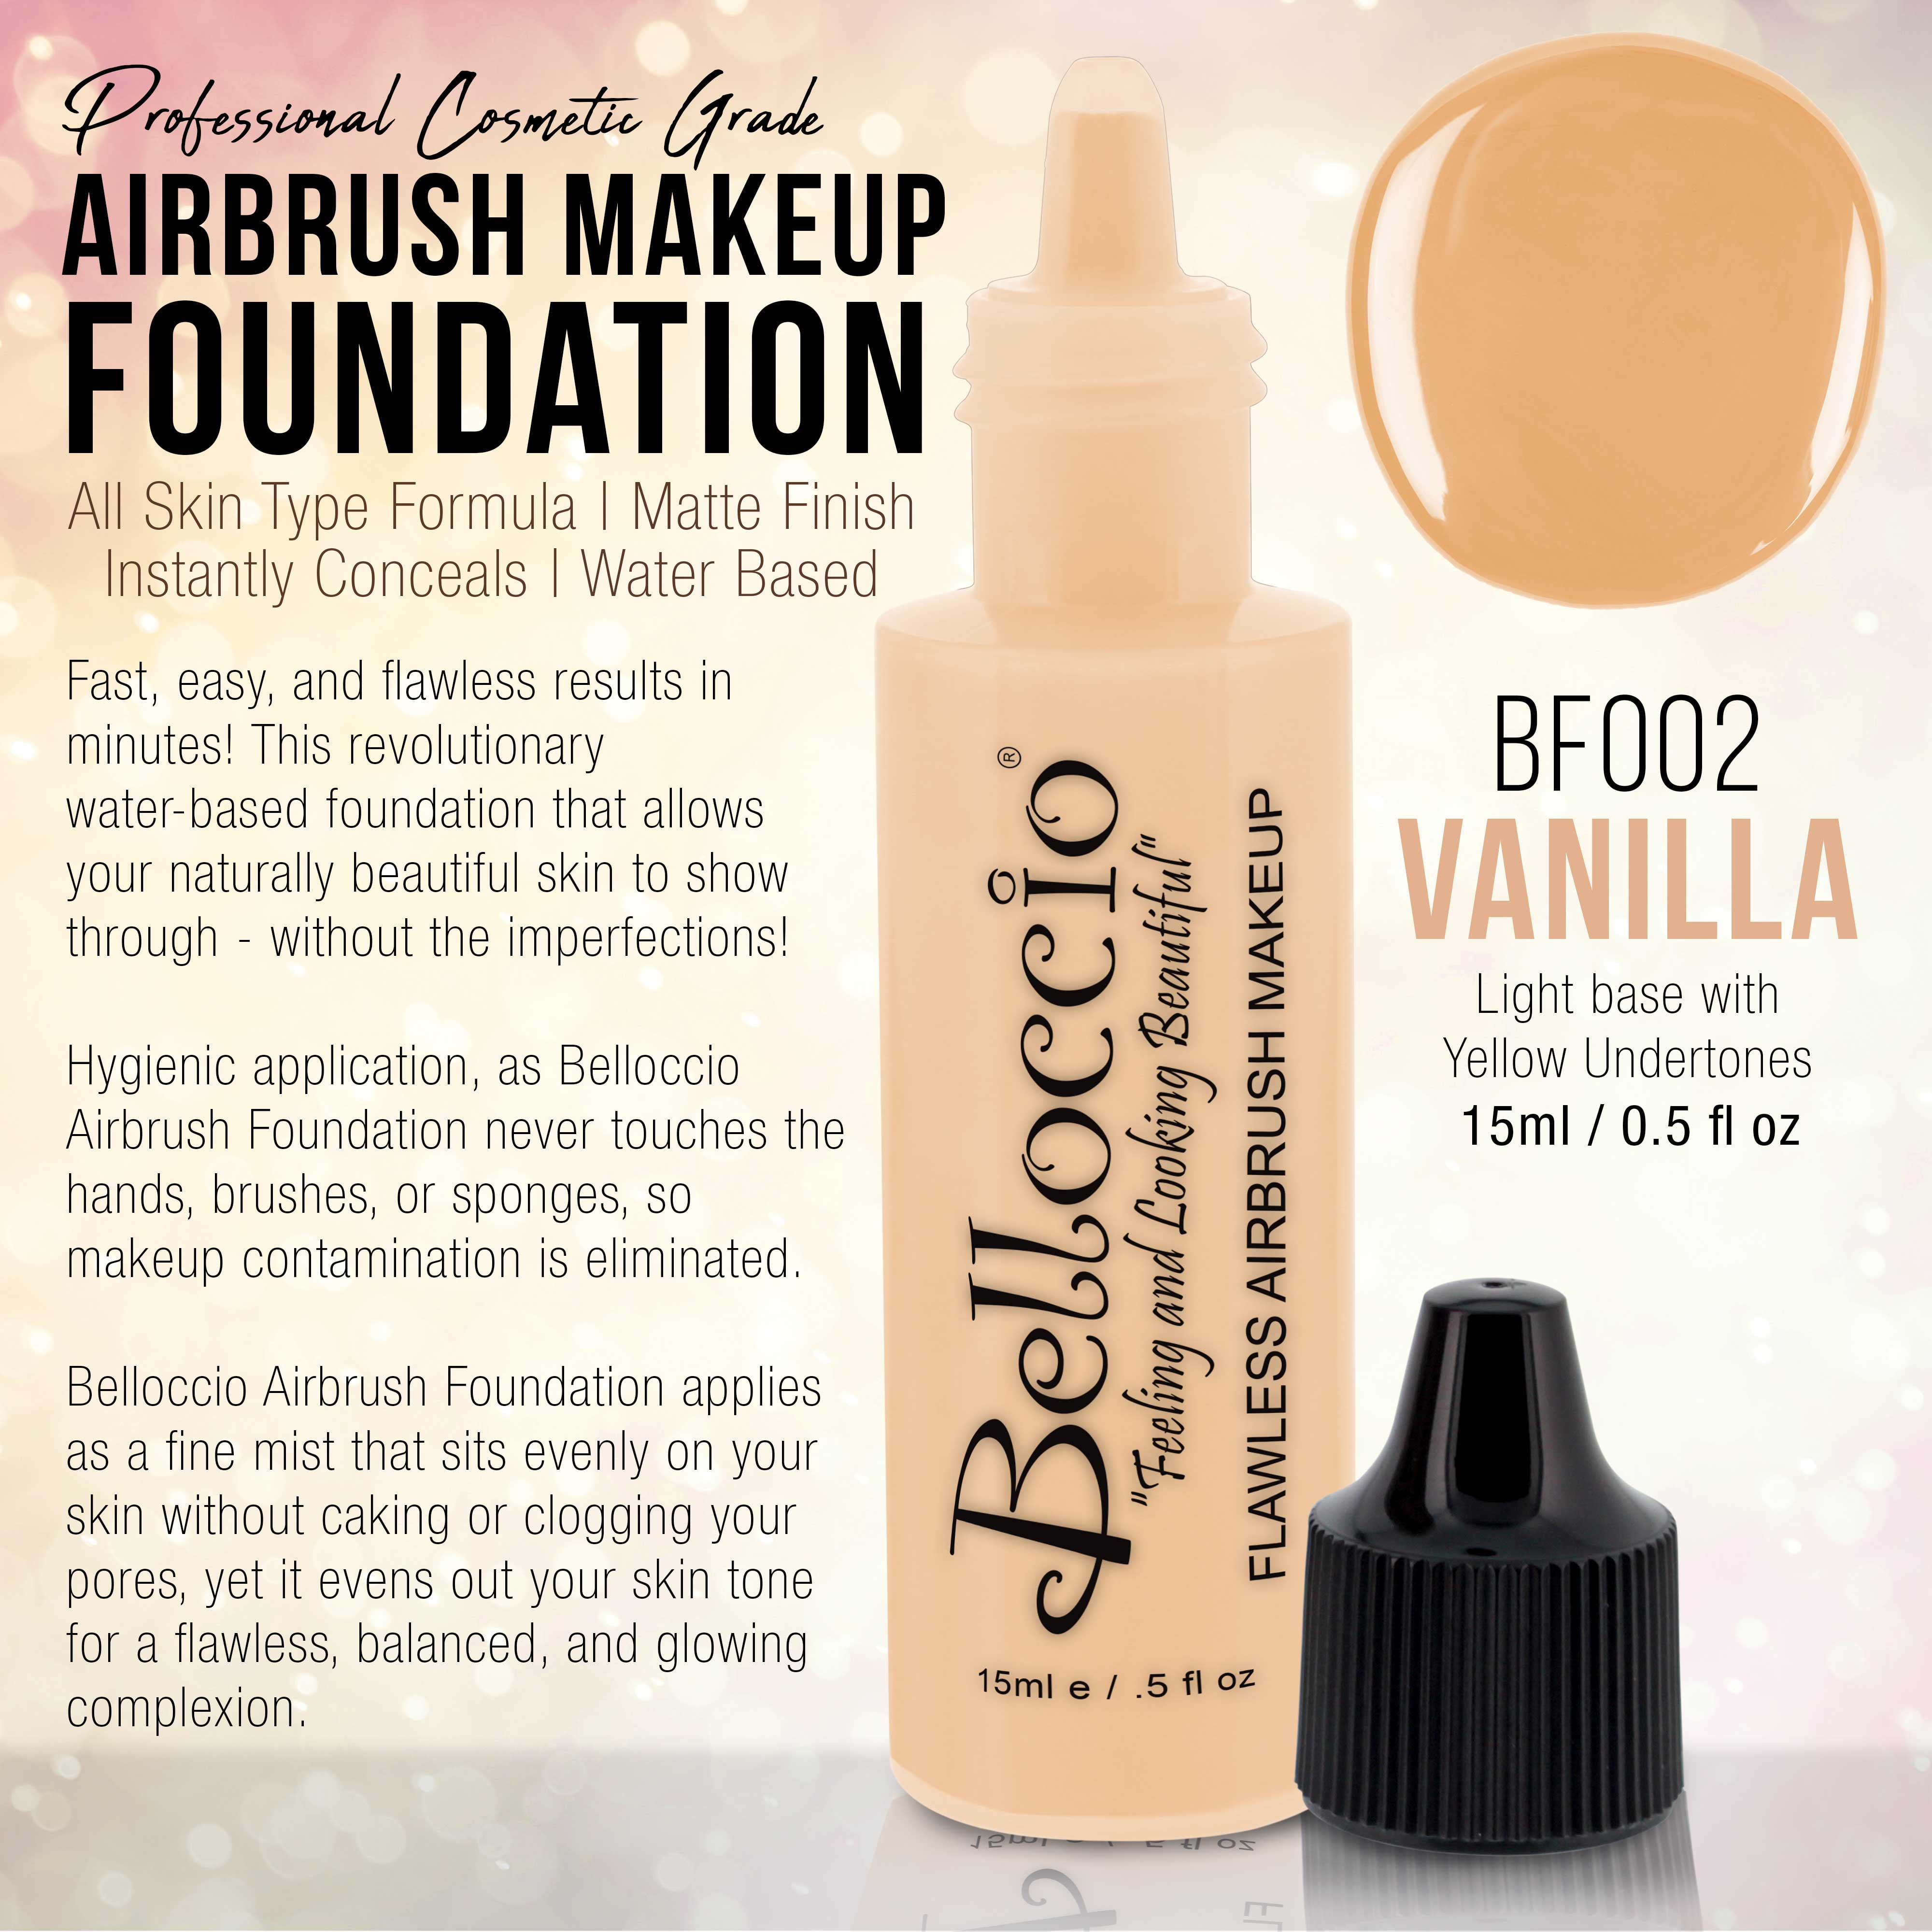 Belloccio Airbrush Cosmetic Makeup System with a MASTER SET of All 17  Foundation Shades plus Blush, Shimmer and Bronzer All in 1/2 oz bottles  Deluxe 1/2-Oz Set All 17 Shades